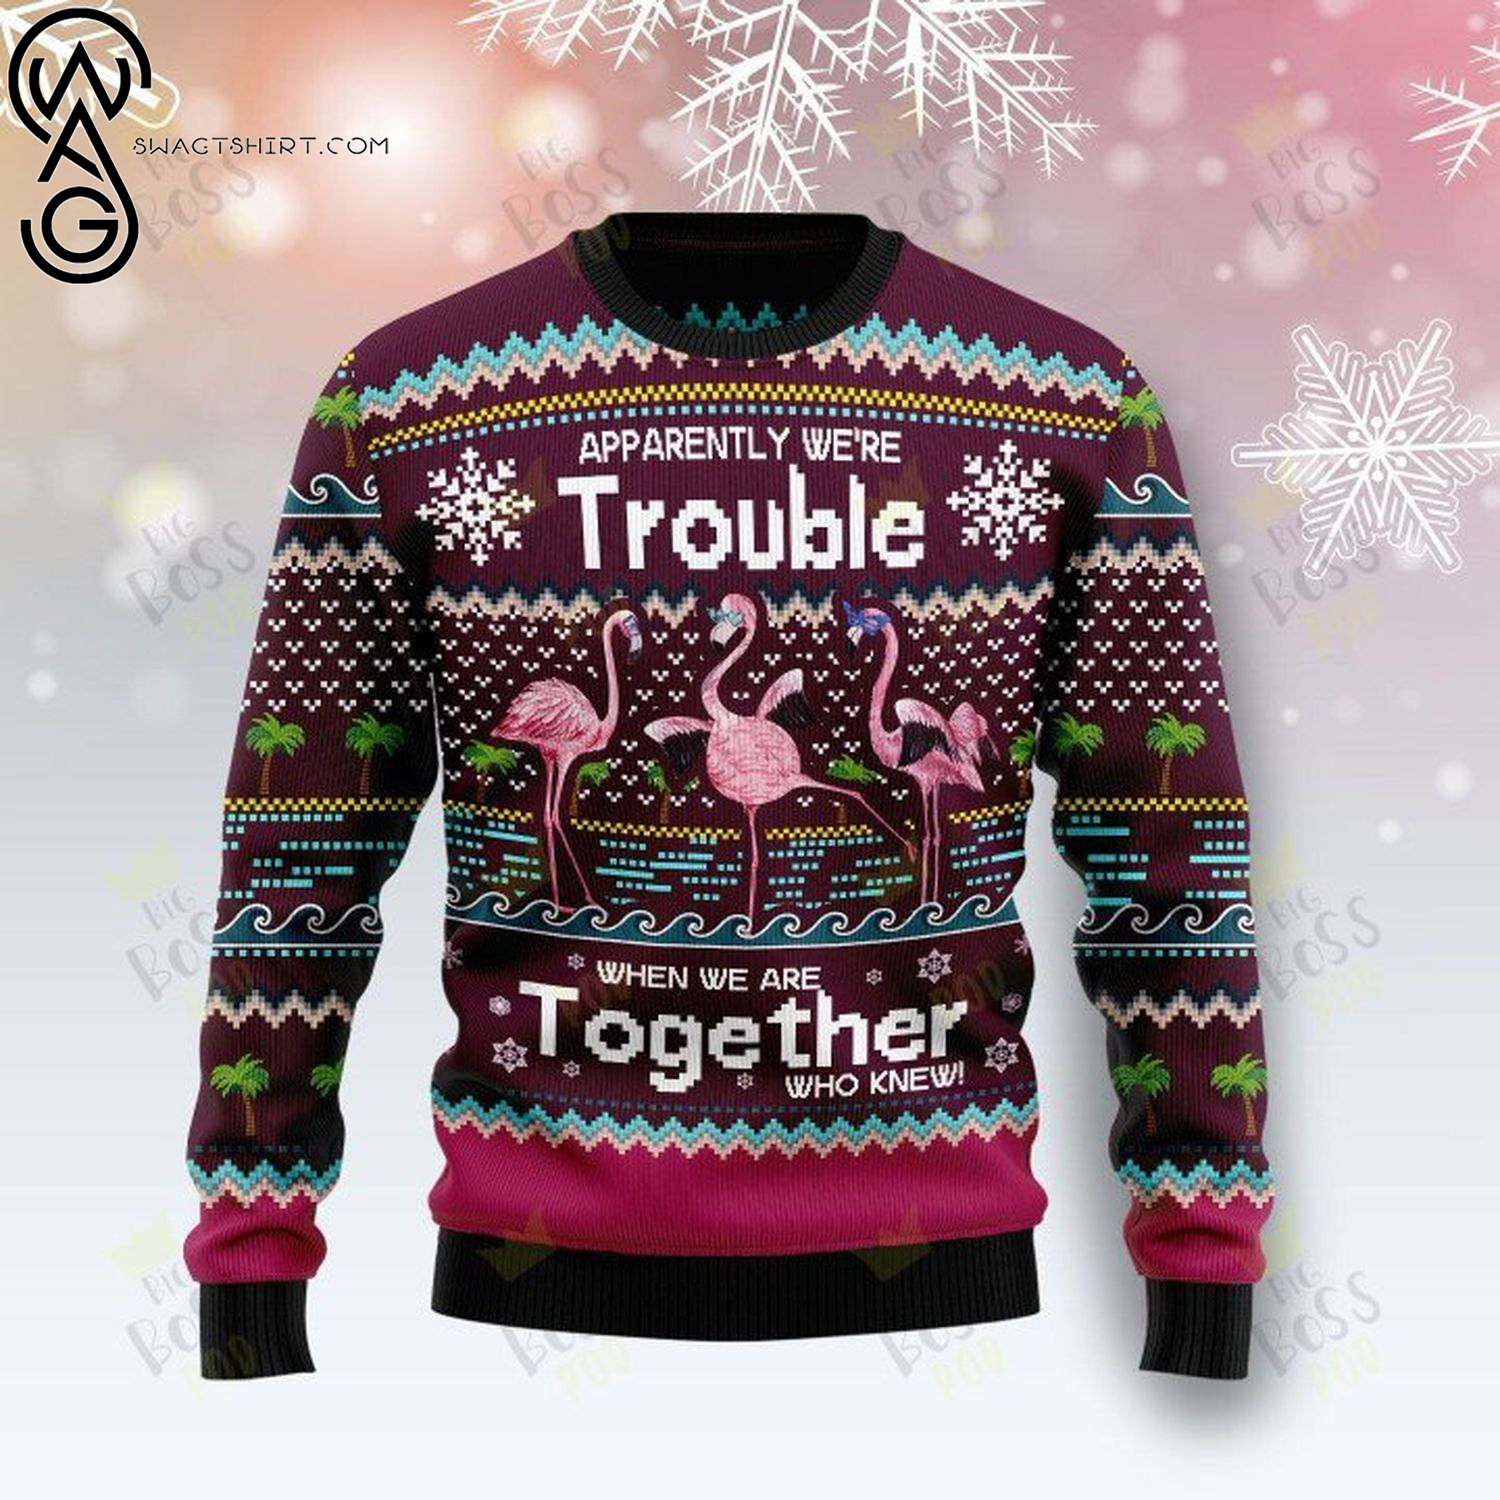 Flamingo apparently we're trouble when we are together full printing ugly christmas sweater